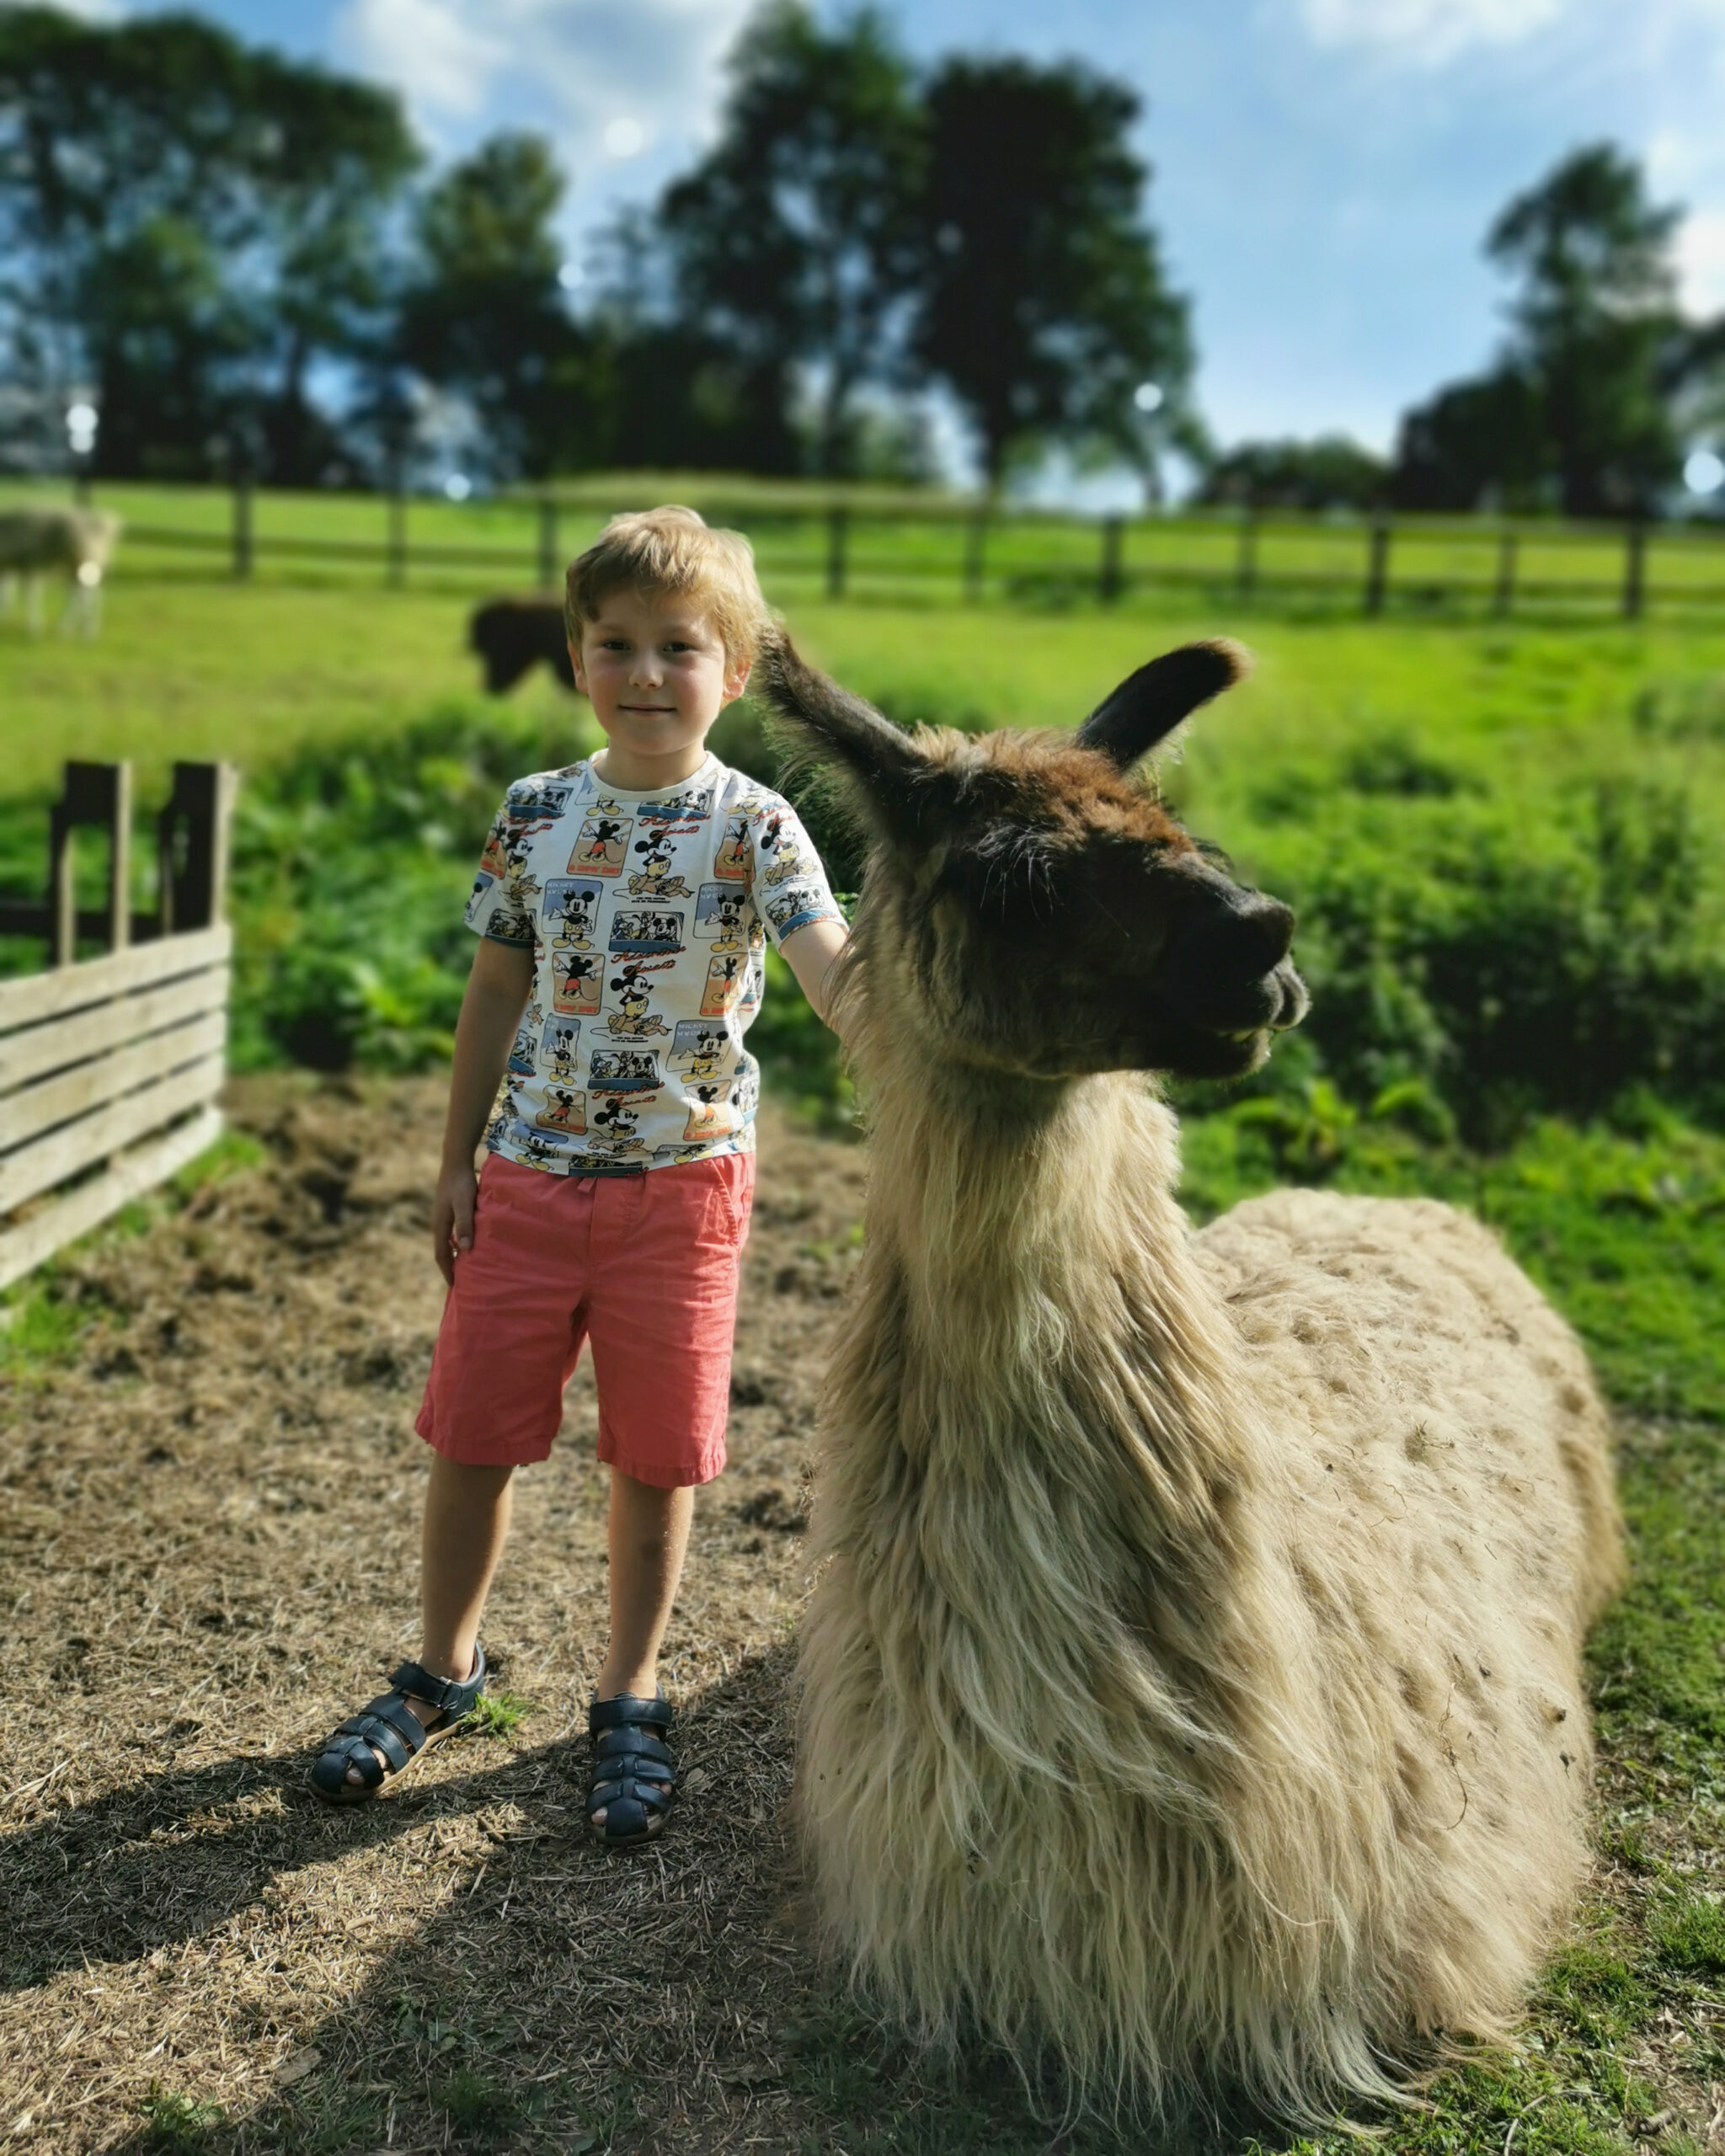 The Merry Harriers, Shepherd's Hut, Glamping, Surrey Staycation, Luxury Glamping, Family Staycation, Surrey, Godalming, The Frenchie Mummy, Press Trip, Family-Friendly, Staycation, Llama Trek, Llamas, Hot Tub, Country Adventures, 